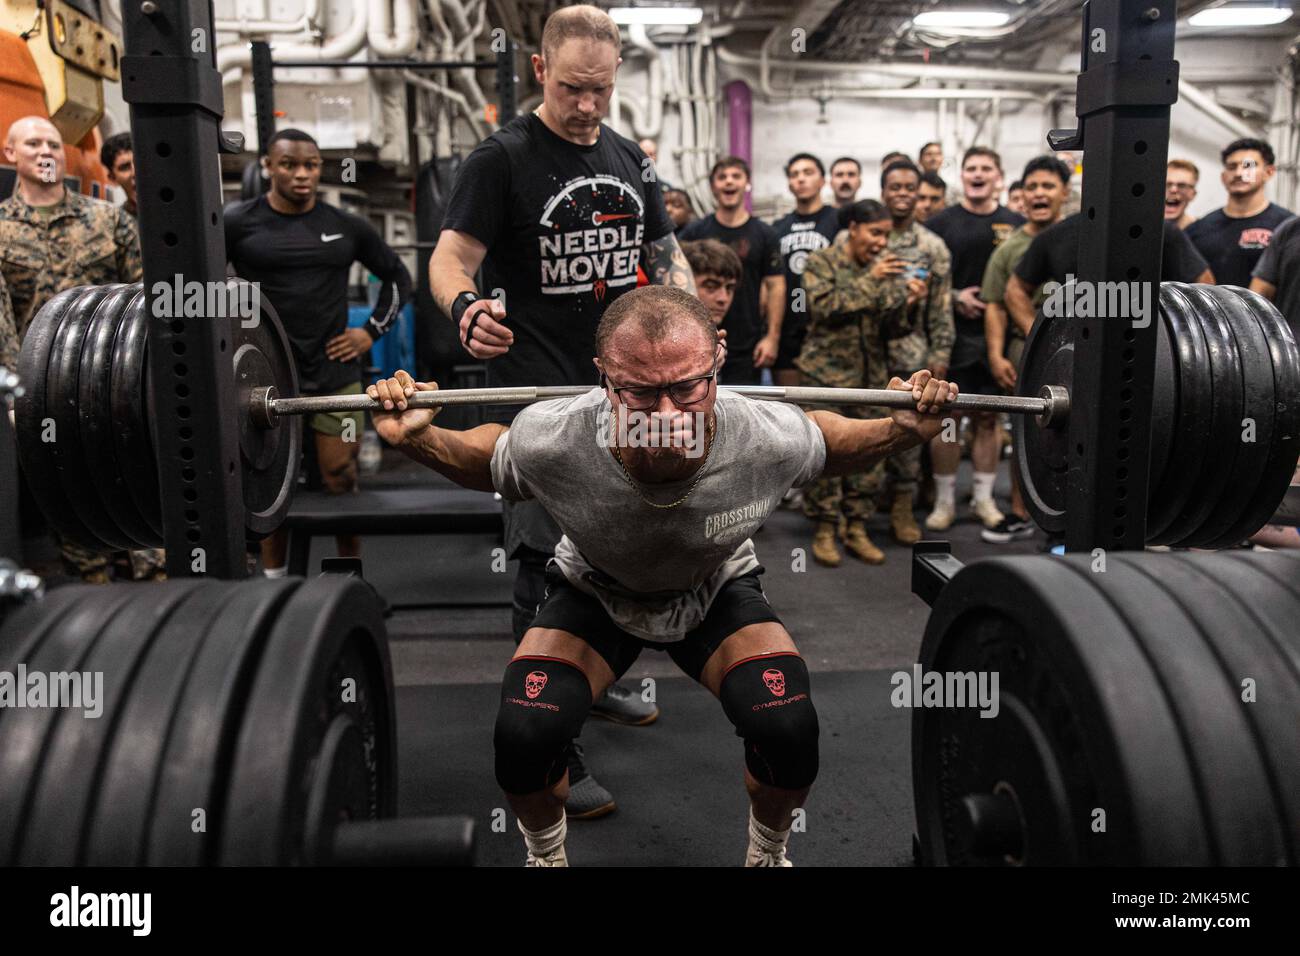 U.S. Marine Corps Lance Cpl. Justin Rigling, a field artillery fire controller with Battalion Landing Team 2/5, 31st Marine Expeditionary Unit, squats during a weightlifting meet aboard USS New Orleans (LPD 18) in the Sea of Japan, Sept. 4, 2022. The 1000 Pound Club is a weightlifting event where participants must lift a cumulative one thousand pounds in squat, bench, and deadlift. The 31st MEU is operating aboard ships of the Tripoli Amphibious Ready Group in the 7th fleet area of operations to enhance interoperability with allies and partners and serve as a ready response force to defend pea Stock Photo